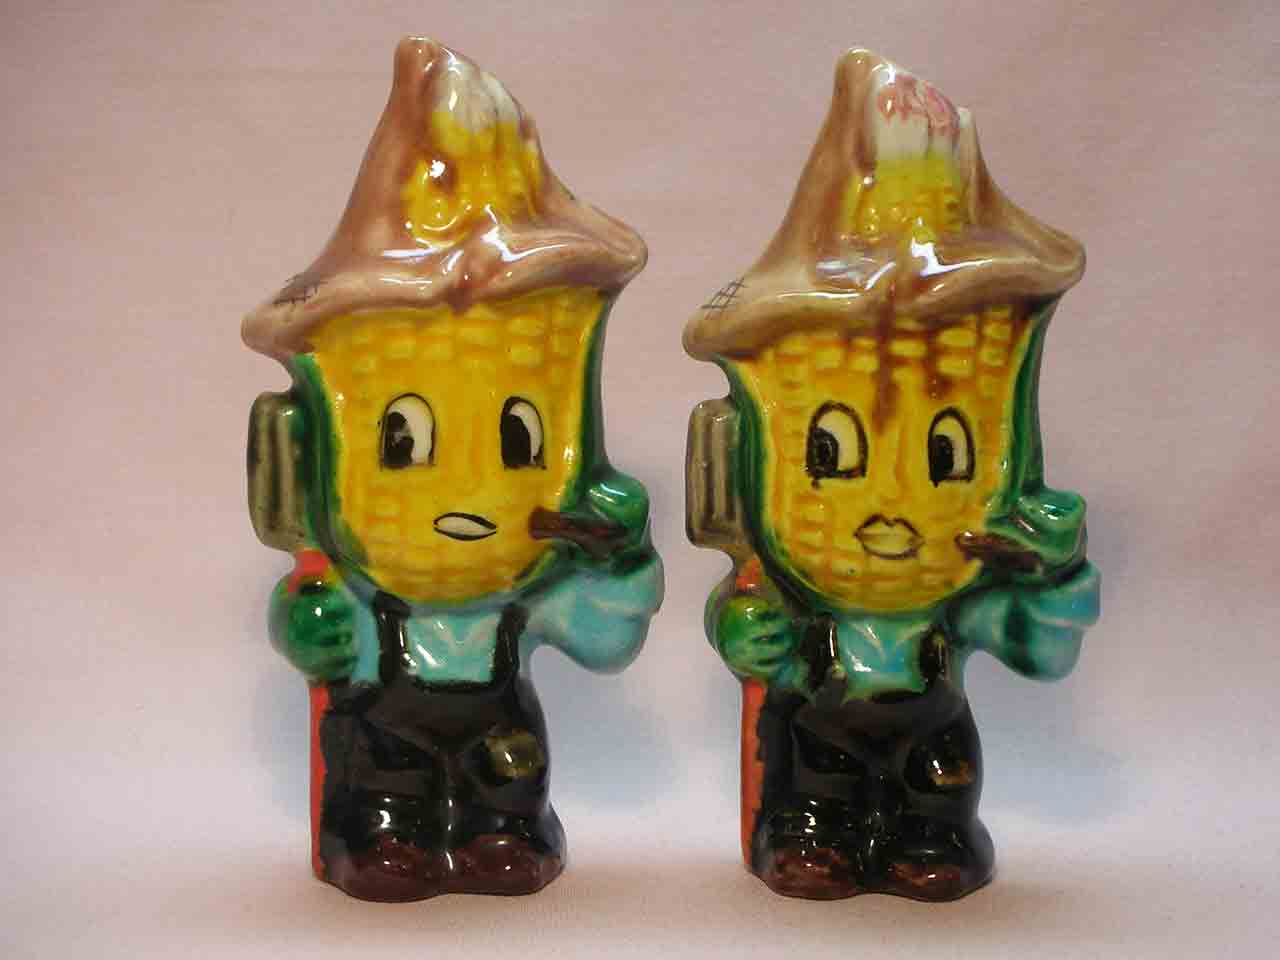 Anthropomorphic vegetable farms salt and pepper shakers called "Country Cousins" - Corn